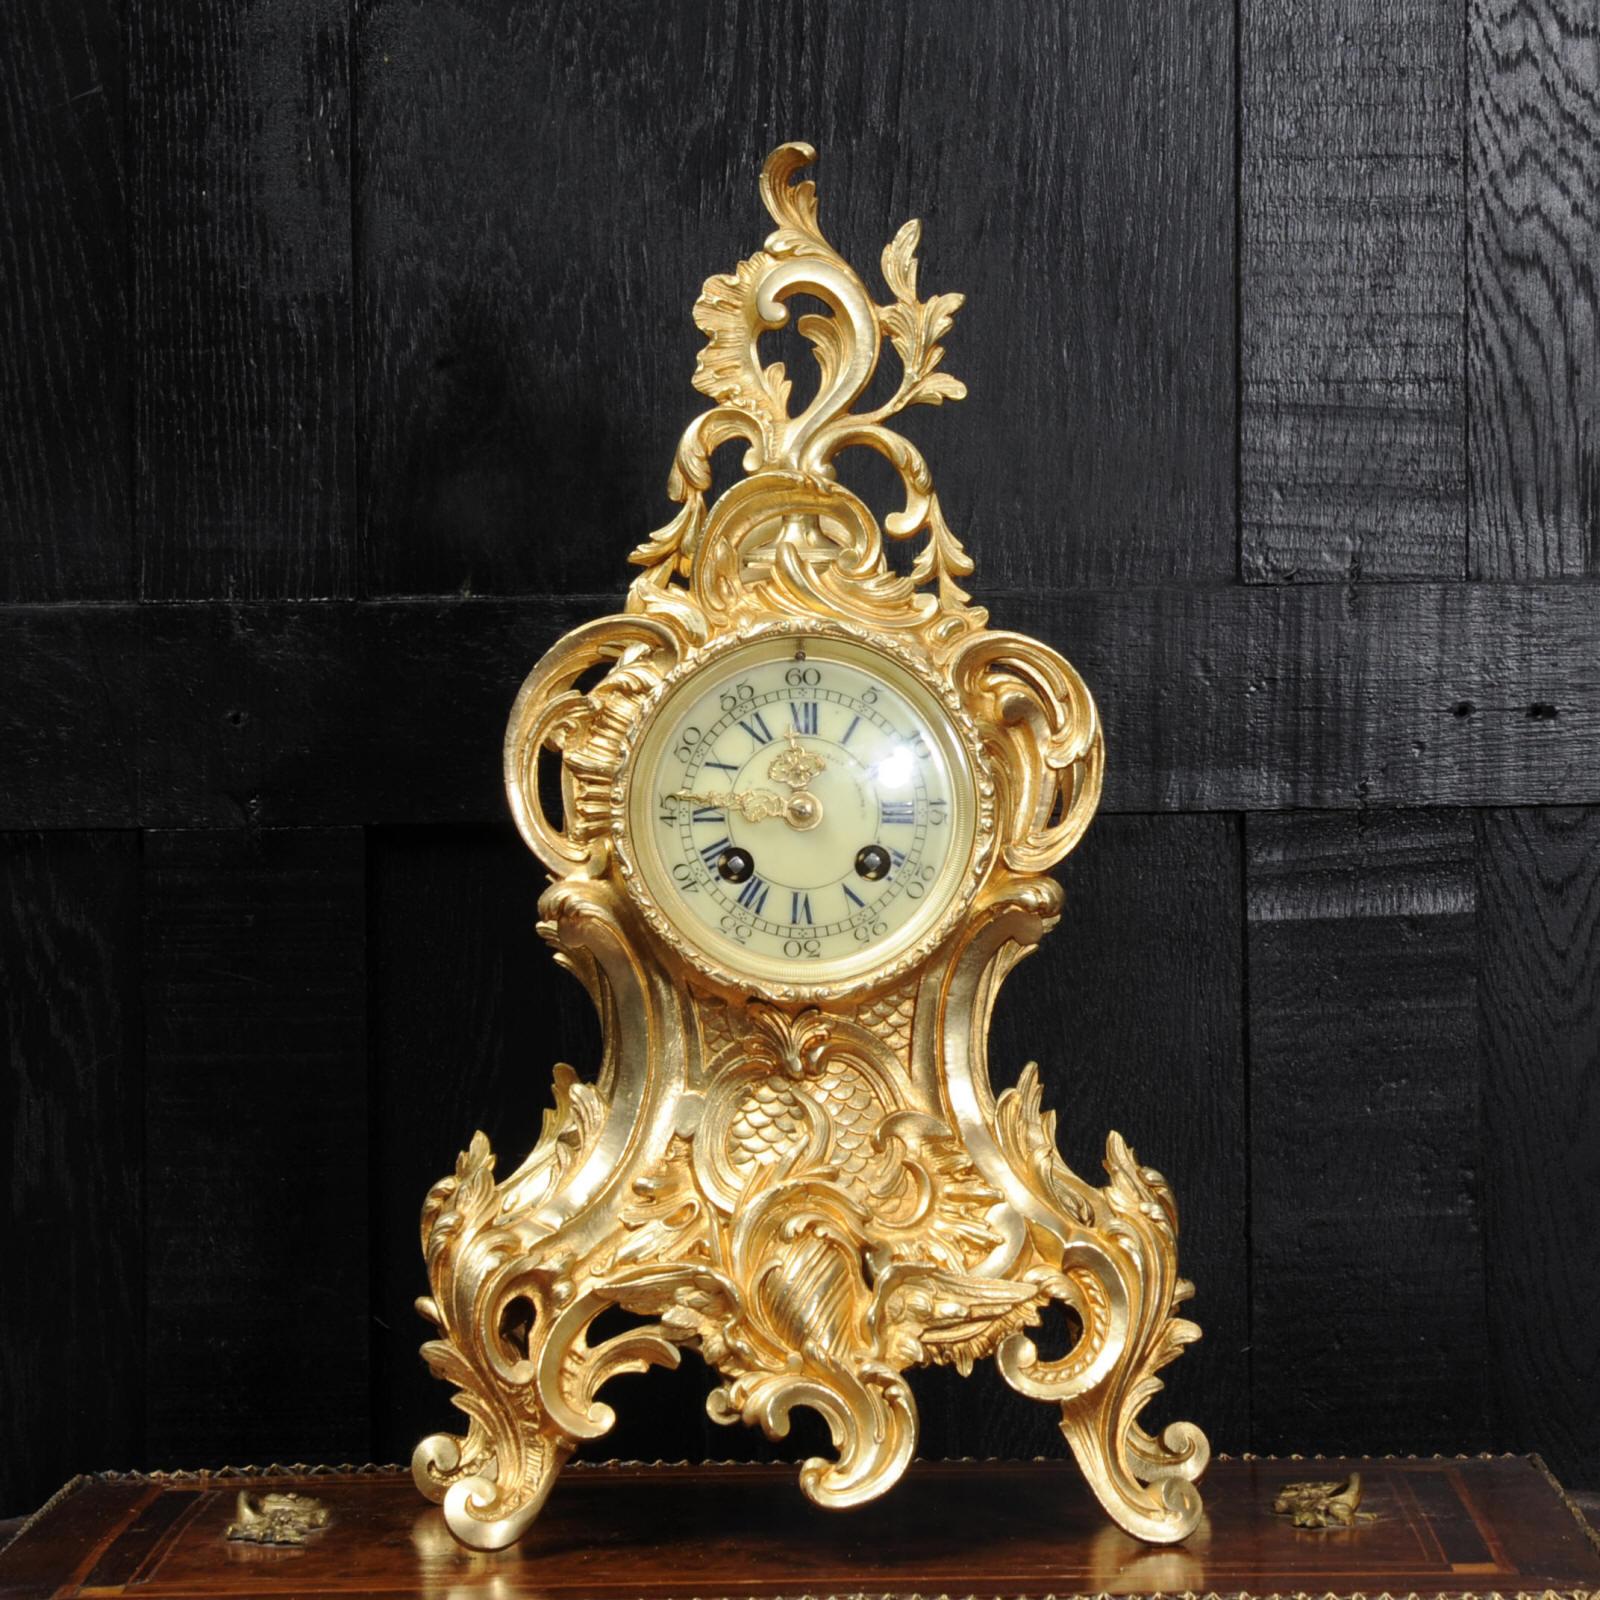 A lovely antique French clock by Louis Japy and retailed by Maison Henri Riondet of Paris, boldly modelled in the Rococo style in gilded bronze. Waisted keyhole shape profusely decorated with 'C' scrolls, and acanthus. To the top is an elaborate